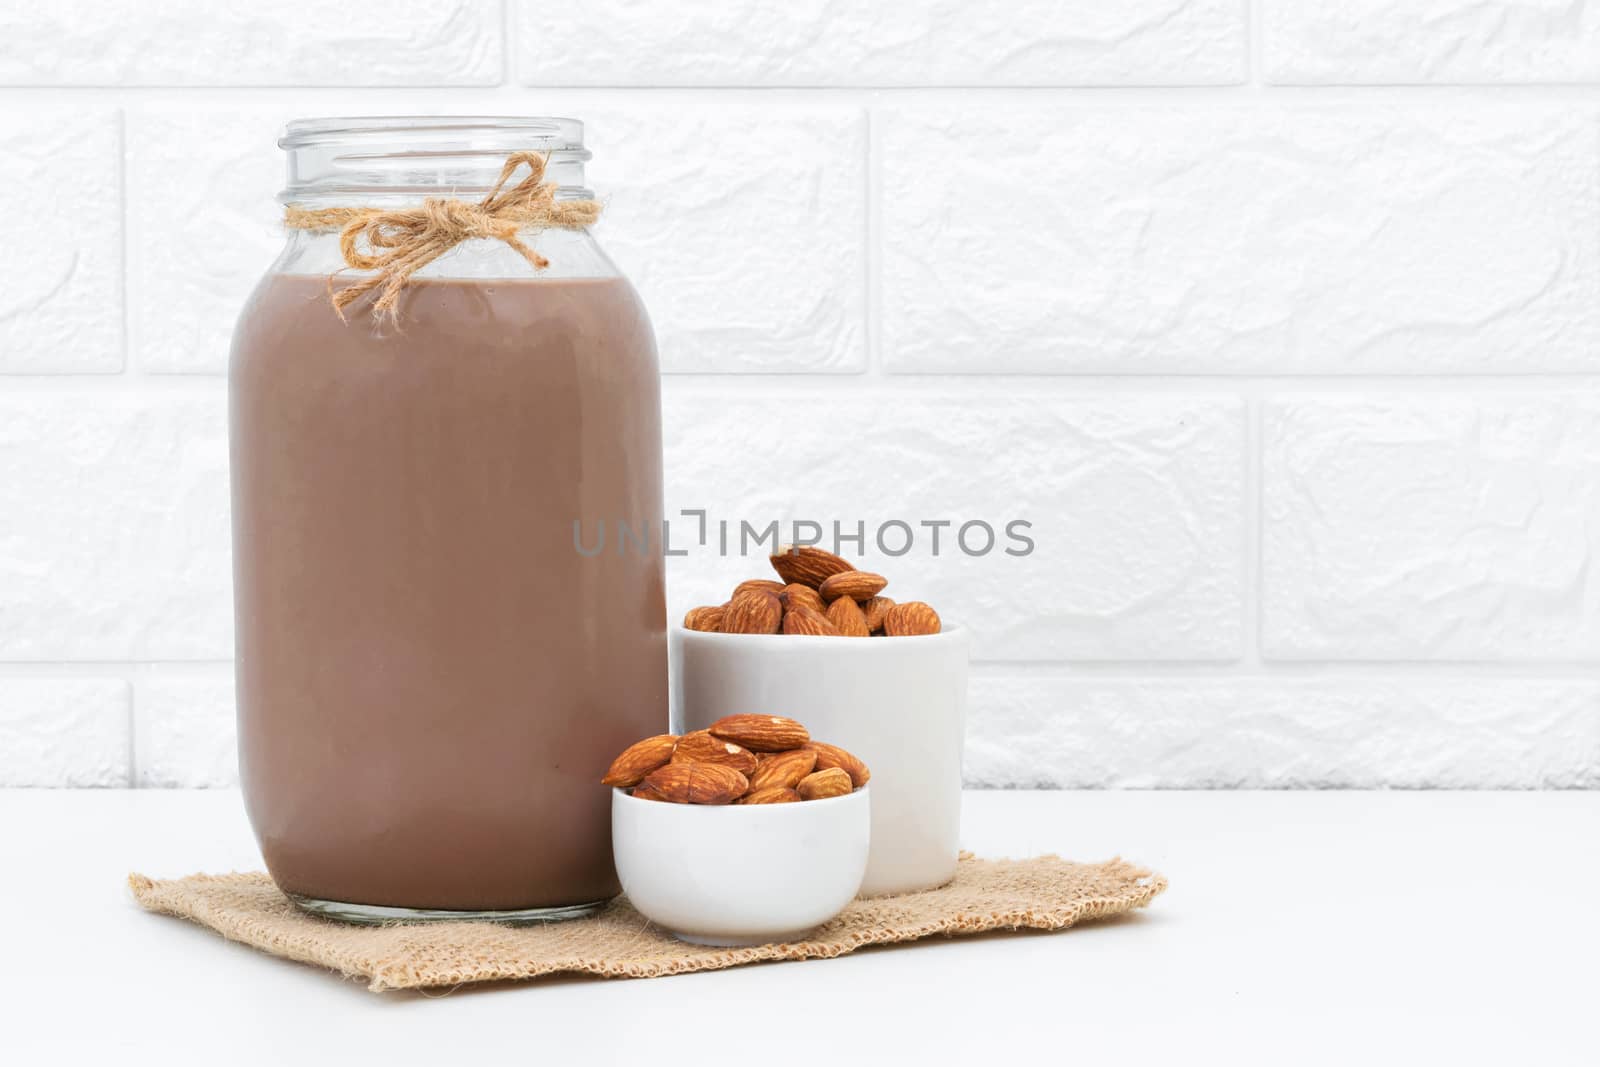 Milk Chocolate and Almonds in a glass on a white background by sompongtom